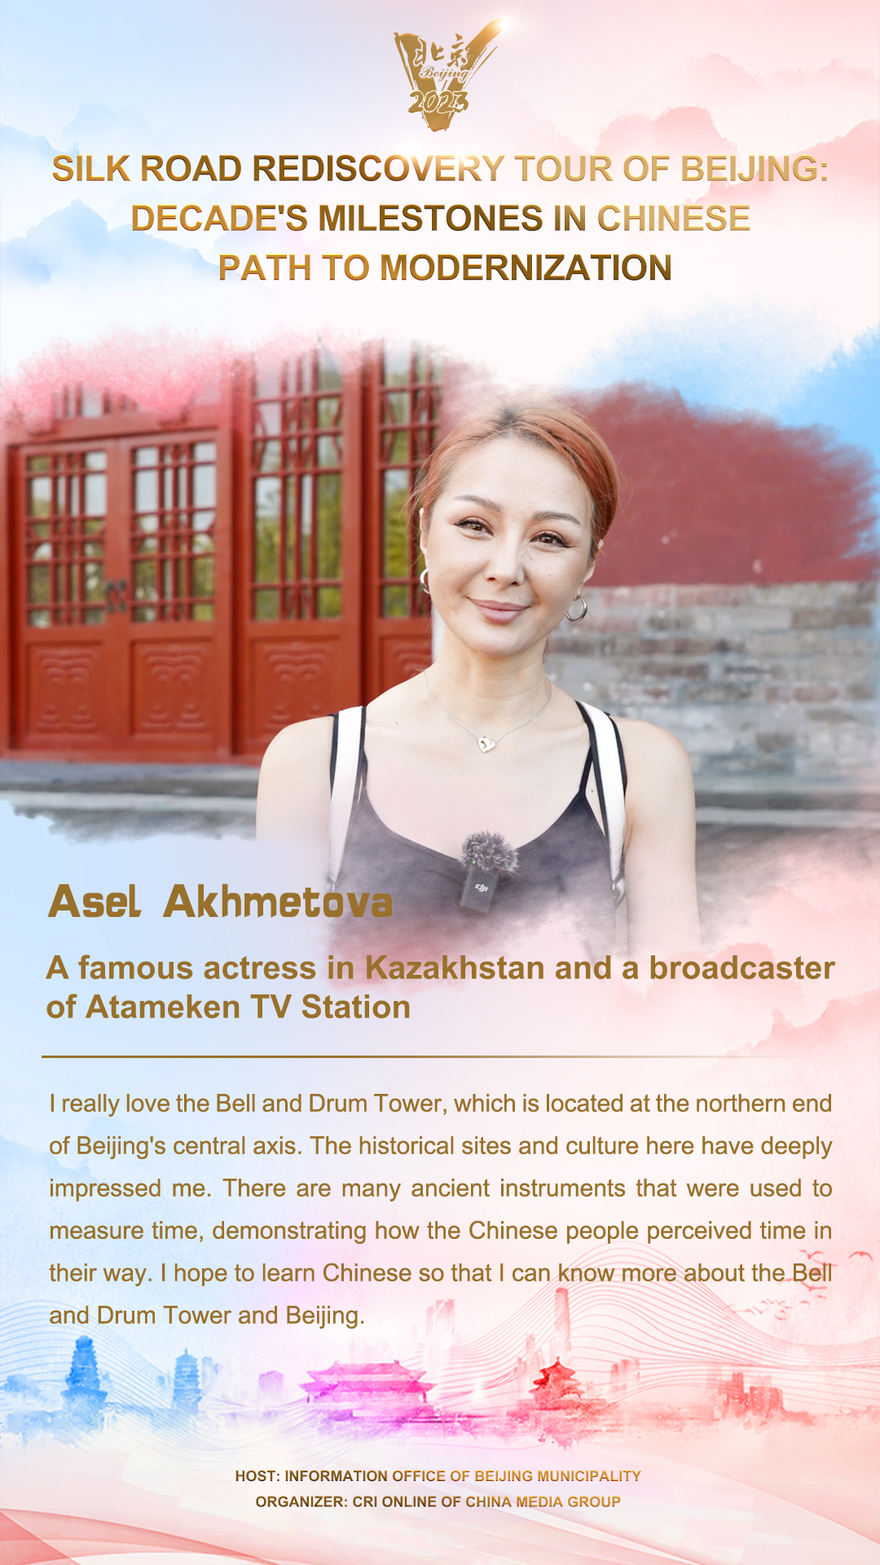 Asel Akhmetova: The historical sites and culture at the Bell and Drum Tower deeply impressed me_fororder_10